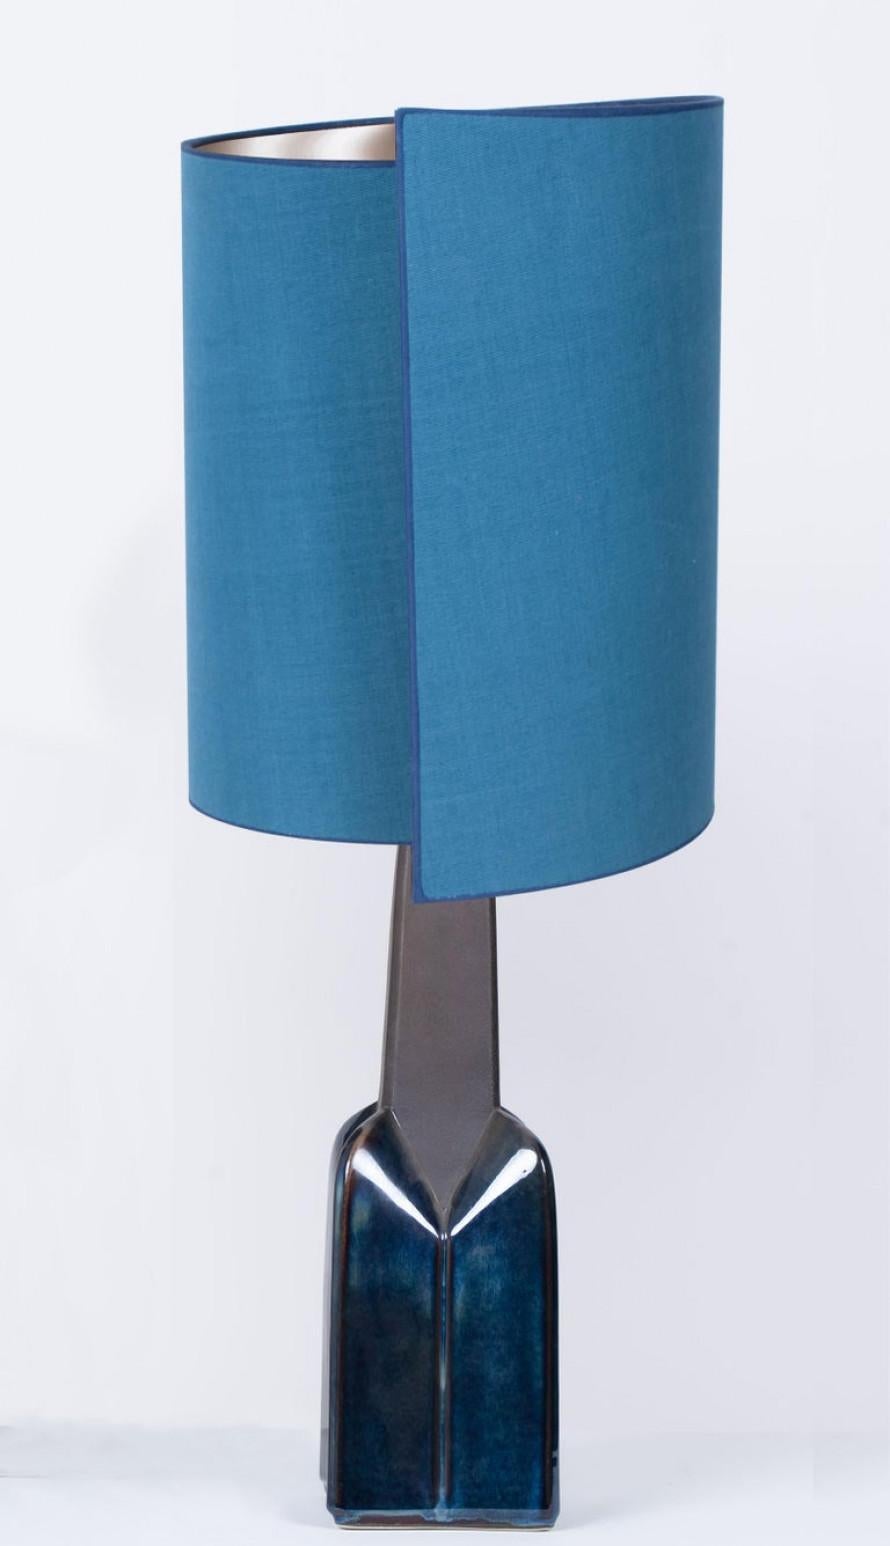 Ceramic table lamp by Soholm, Denmark, 1960s. This high-end sculptural piece is handmade ceramic in blue or grey tones, with a combination of dry and glazed finishes. With a new custom made blue silk lamp shade with warm gold or silver inner-shade